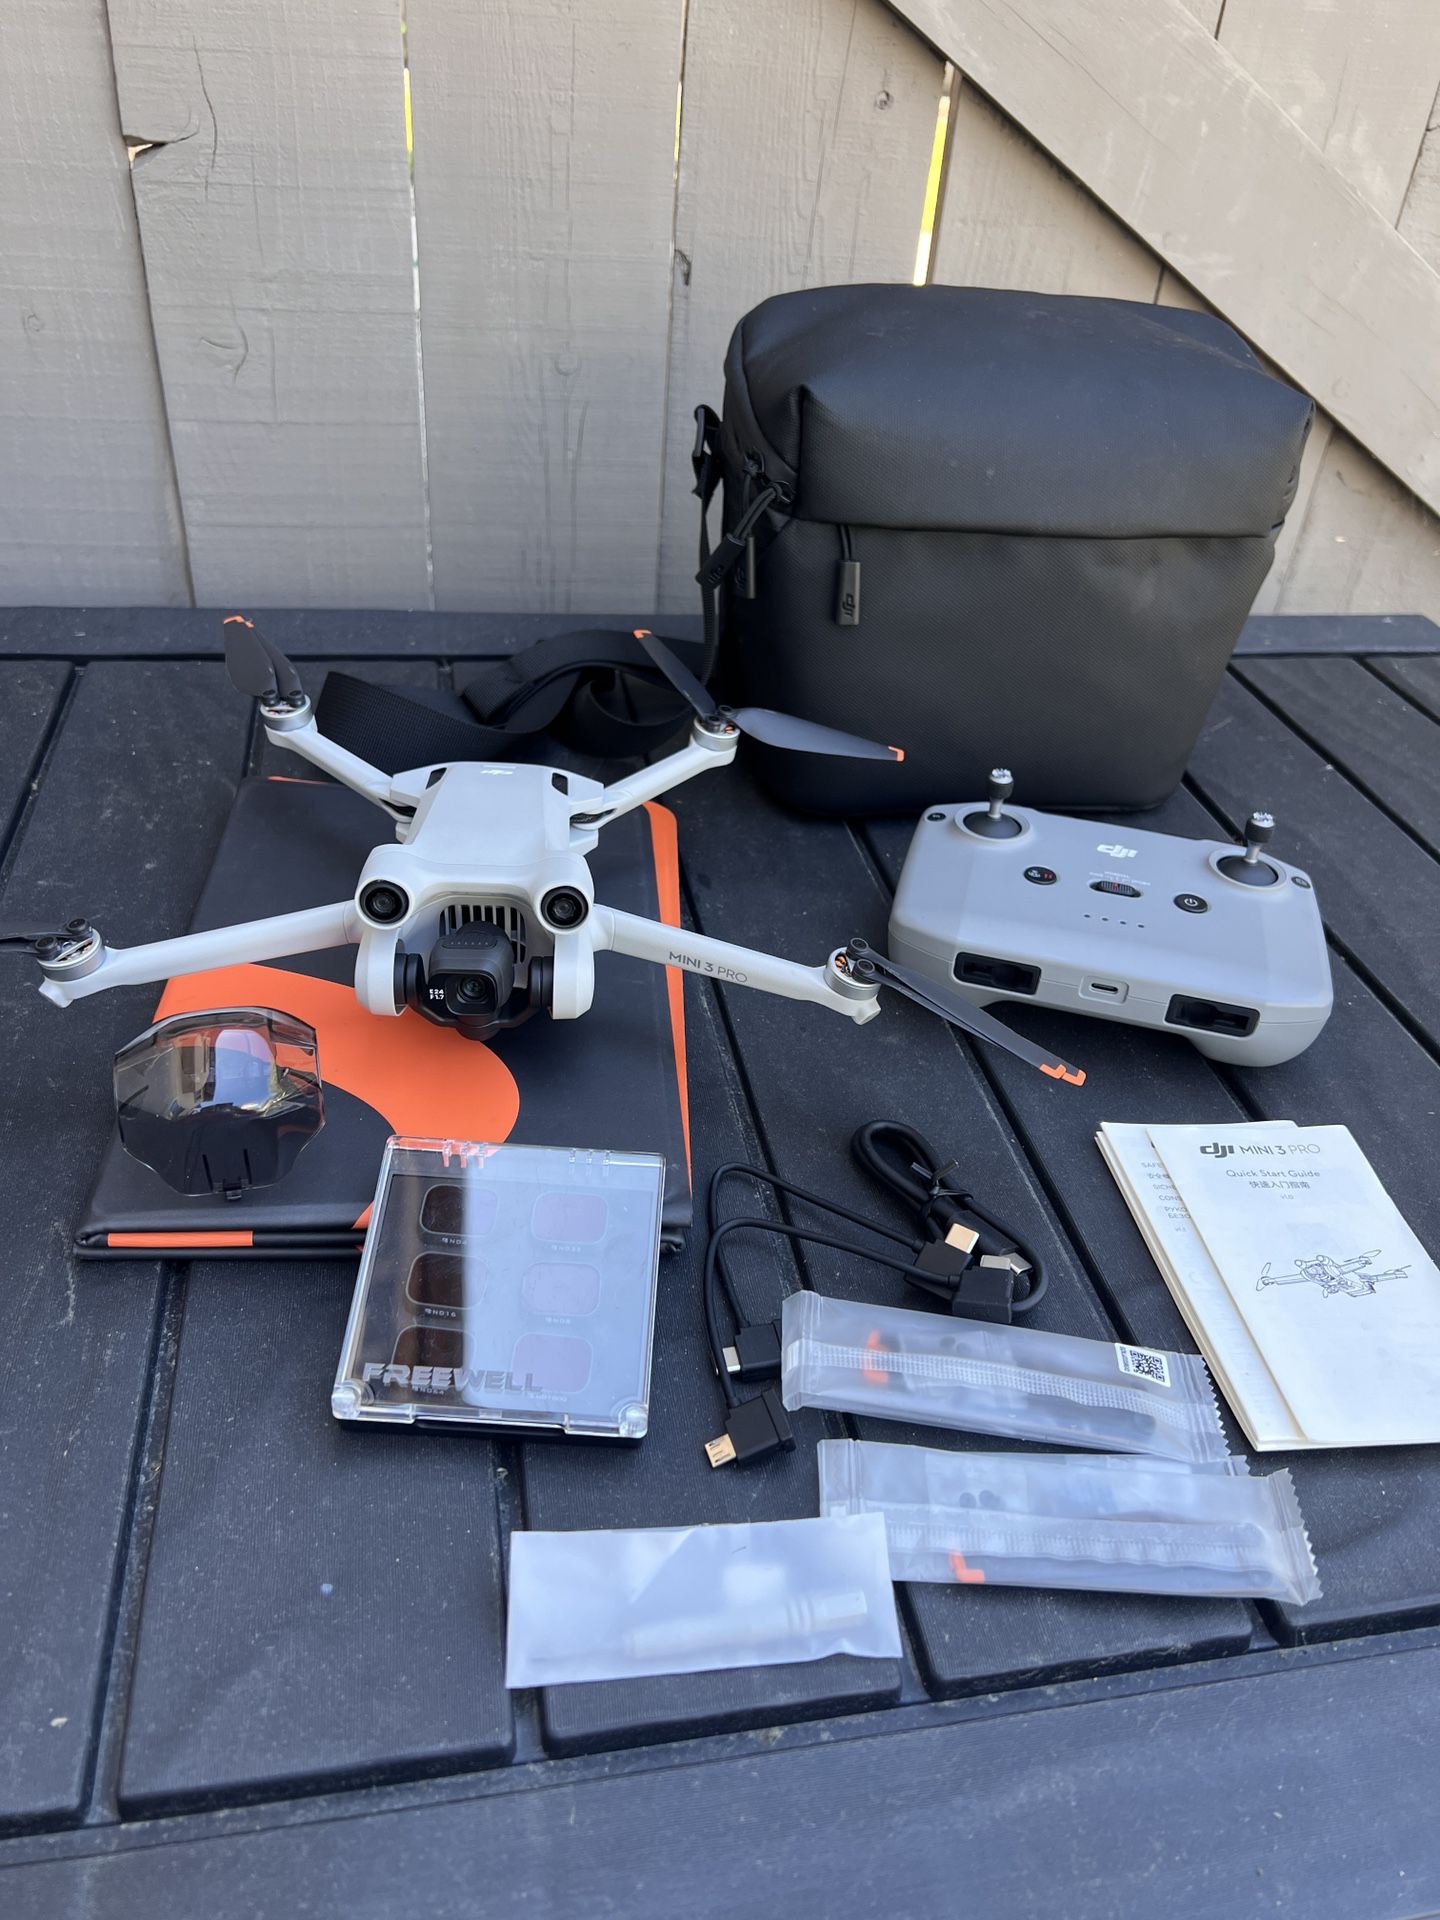 DJI Mini 3 Pro Drone w/ controller, ultra light Battery, 6 Freewell ND Filters, Landing Mat, Bag, and more extras!